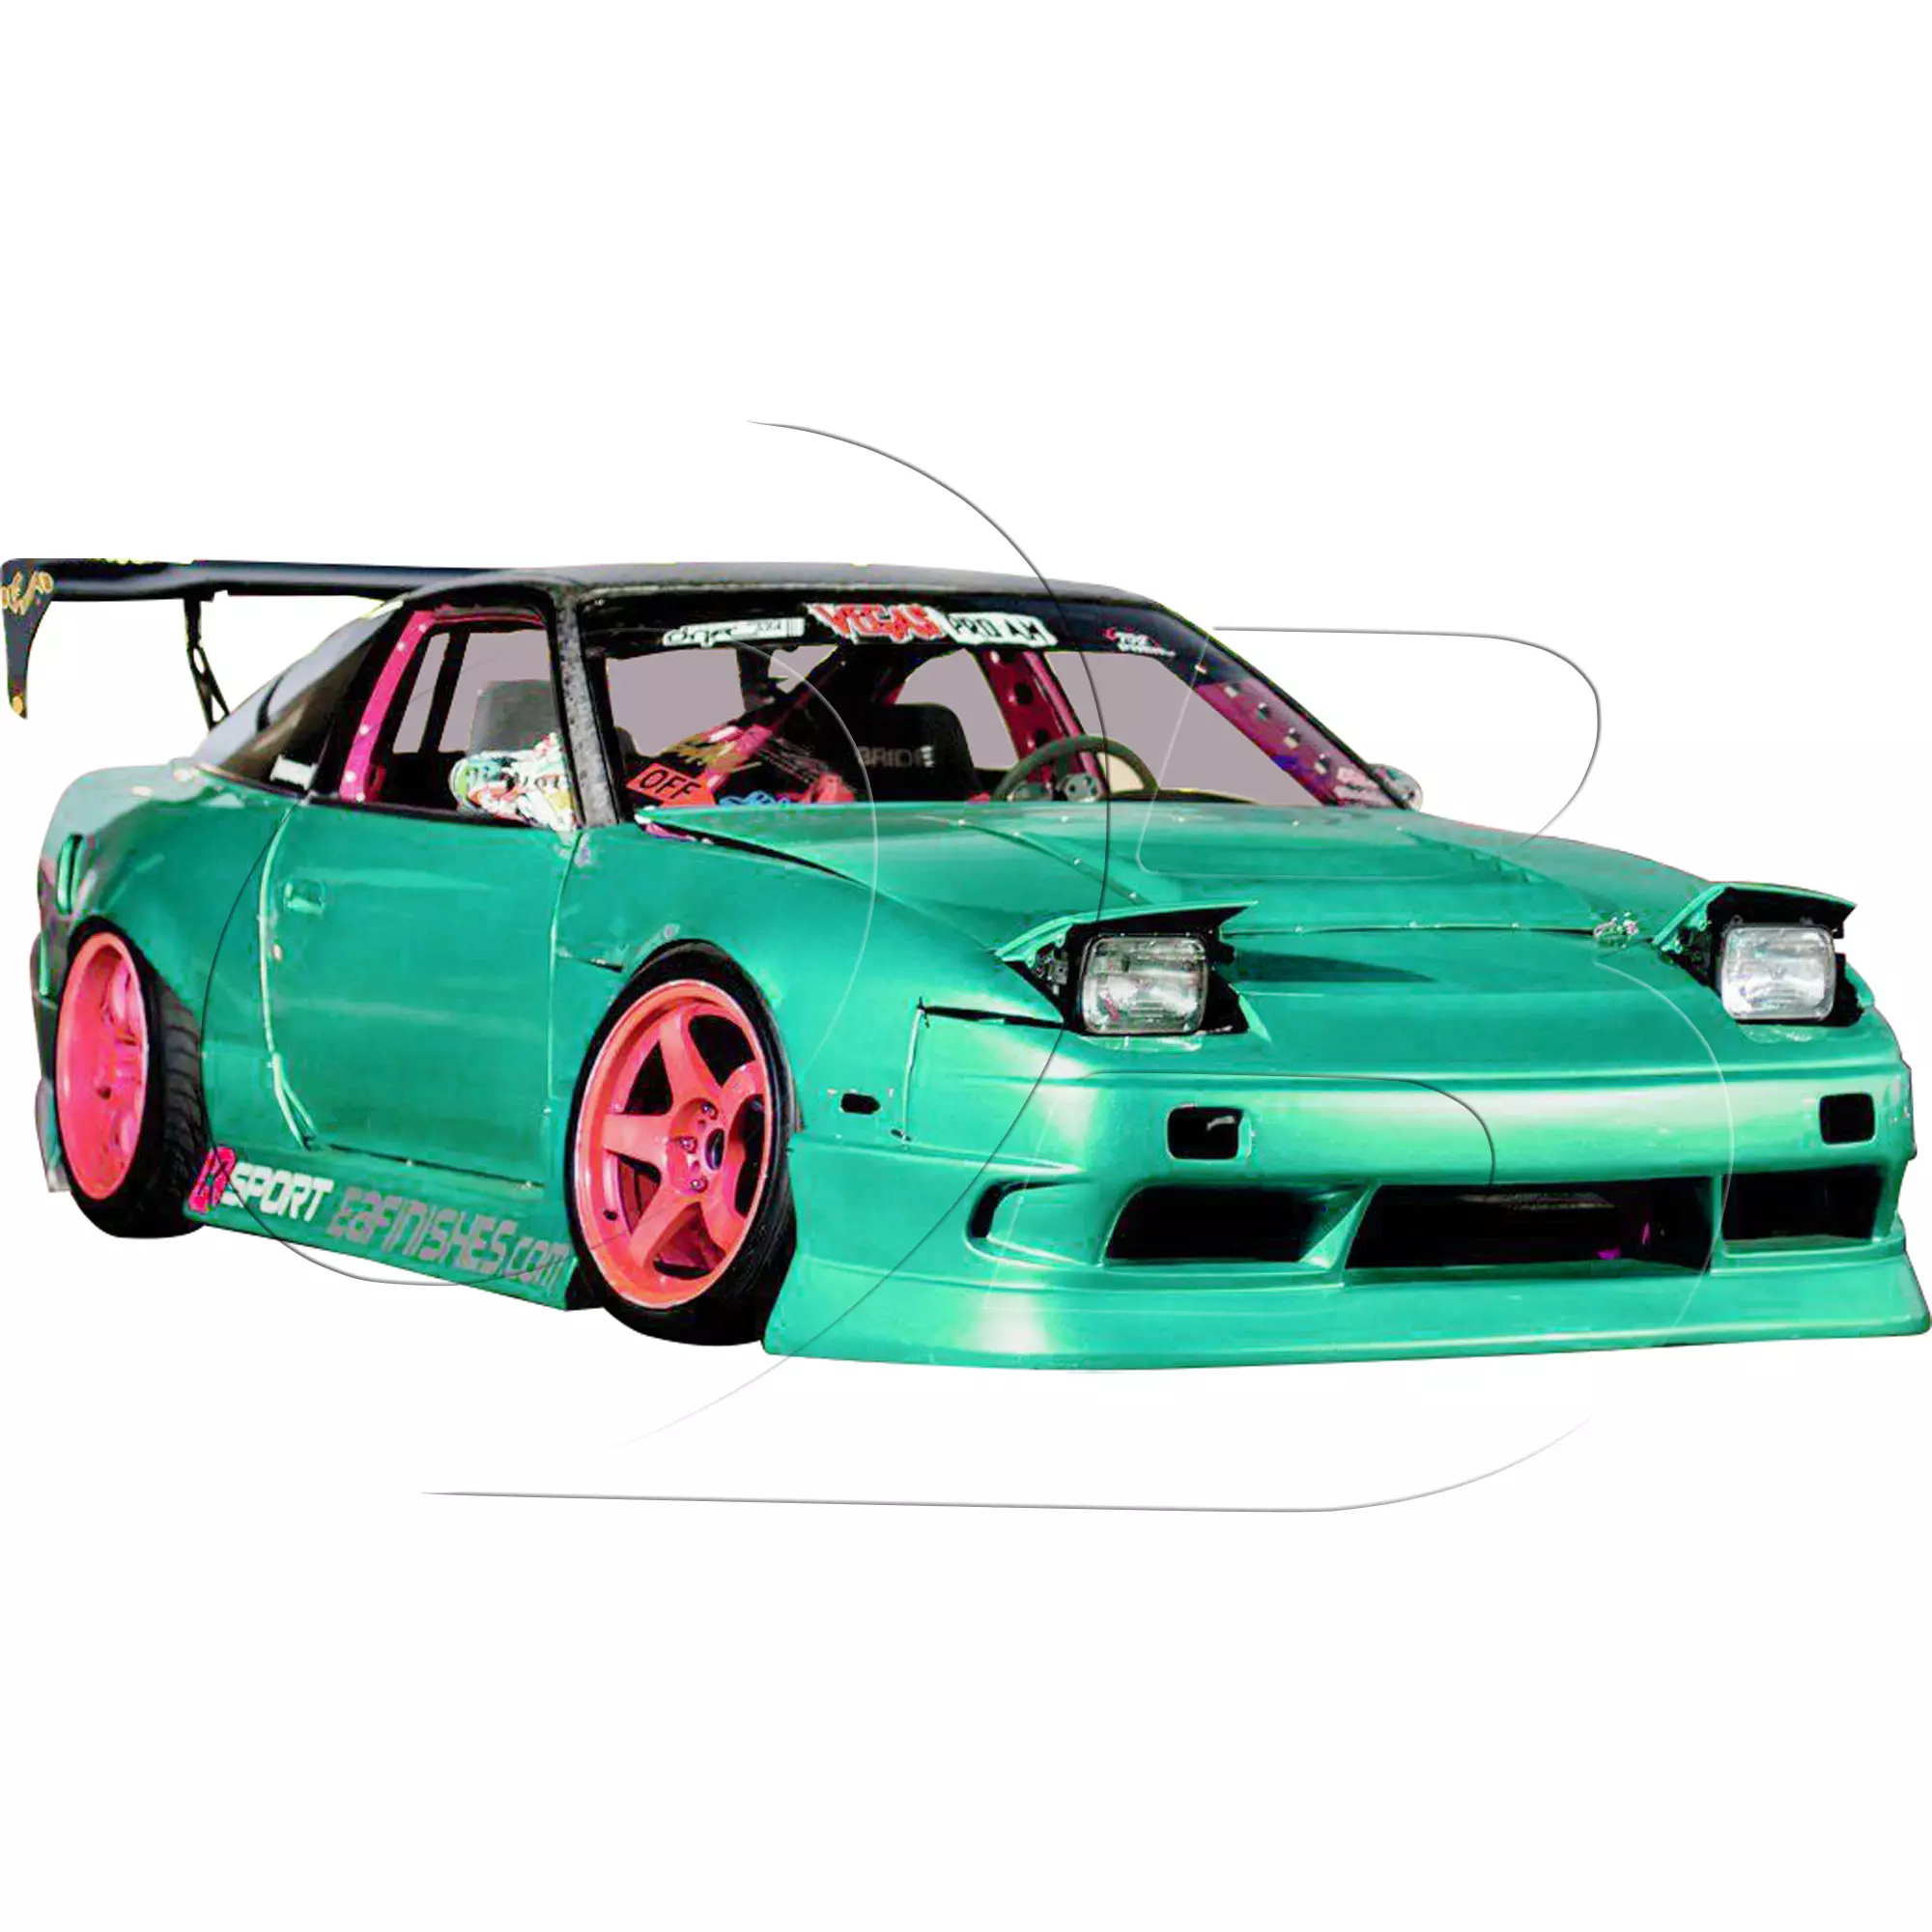 KBD Urethane Bsport2 Style 4pc Full Body Kit > Nissan 240SX 1989-1994 > 2dr Coupe - Image 7